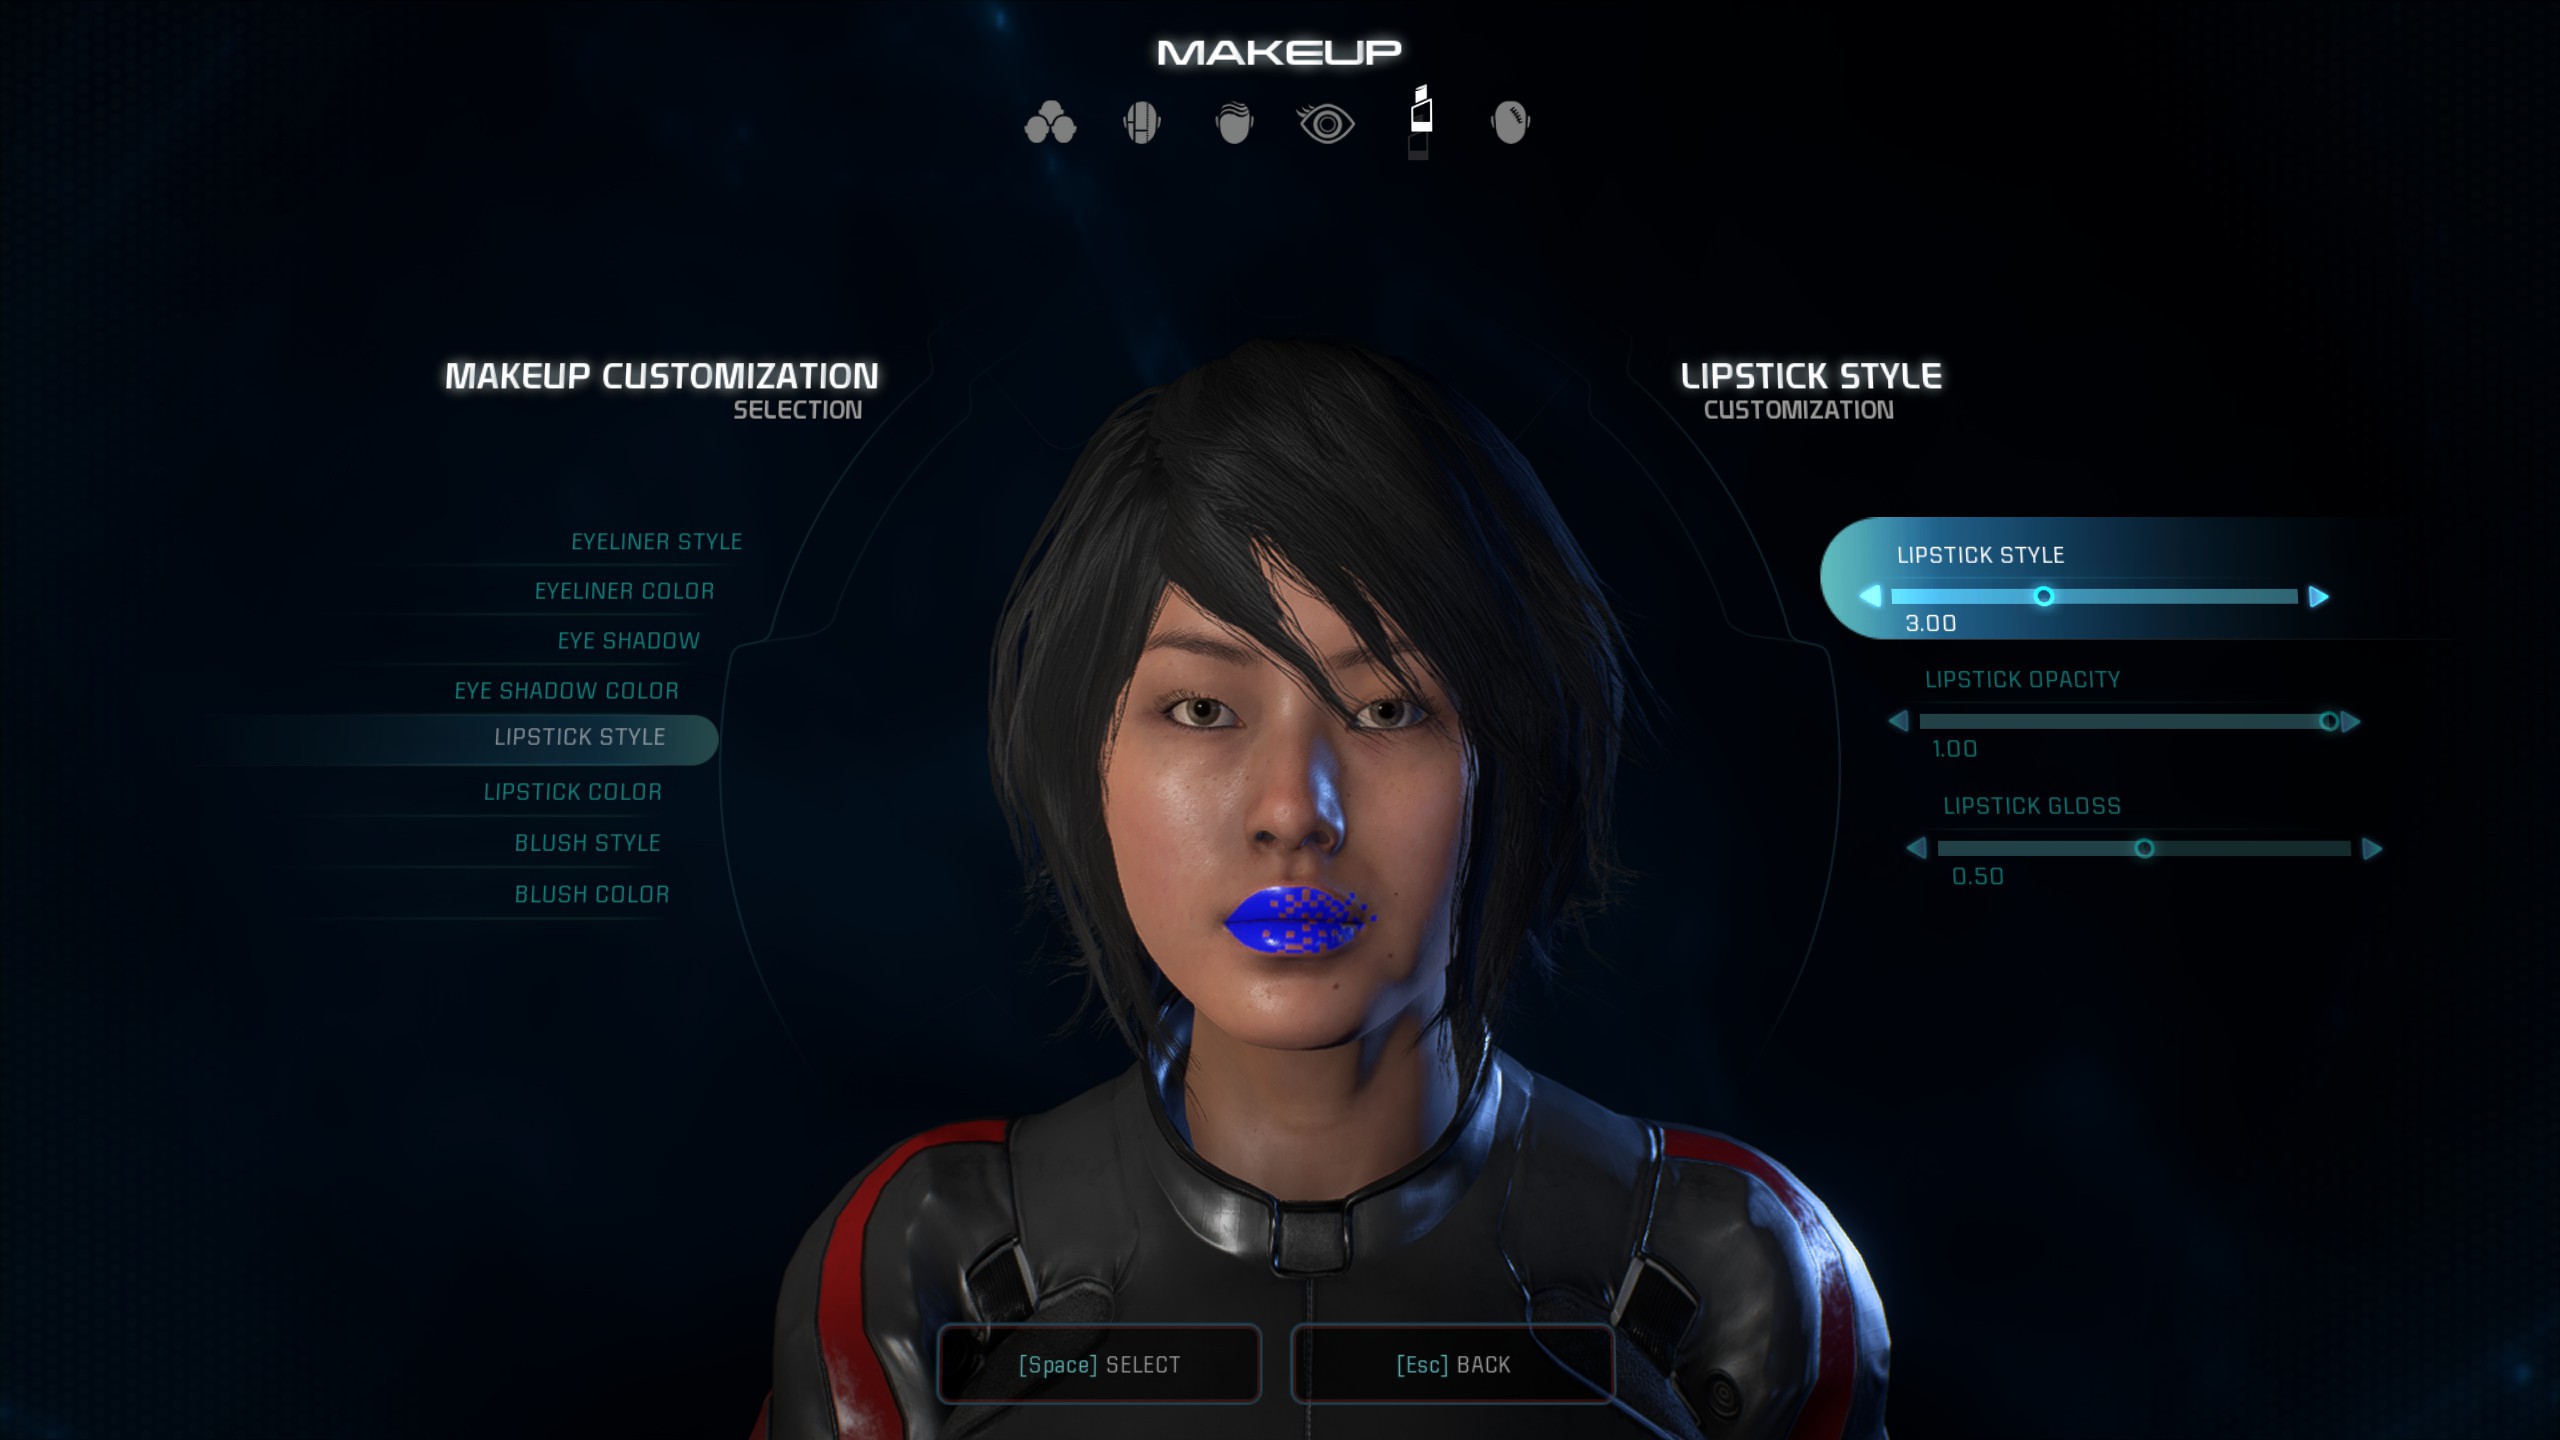 Mass Effect Andromeda Lipstick Style Comparison With GirlGreyBeauty #3